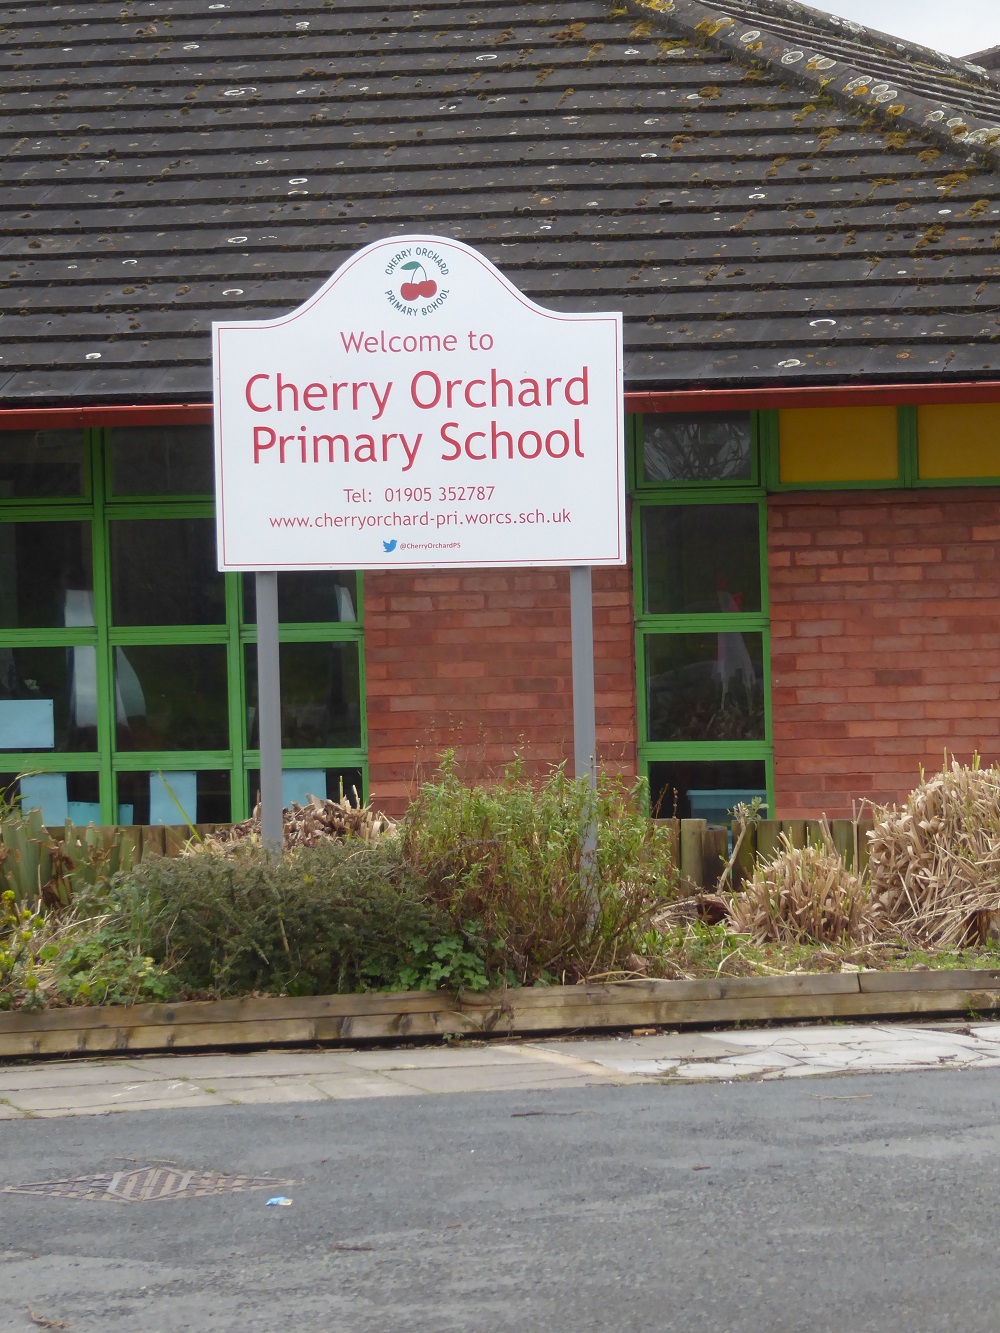 School is put into special measures after critical report